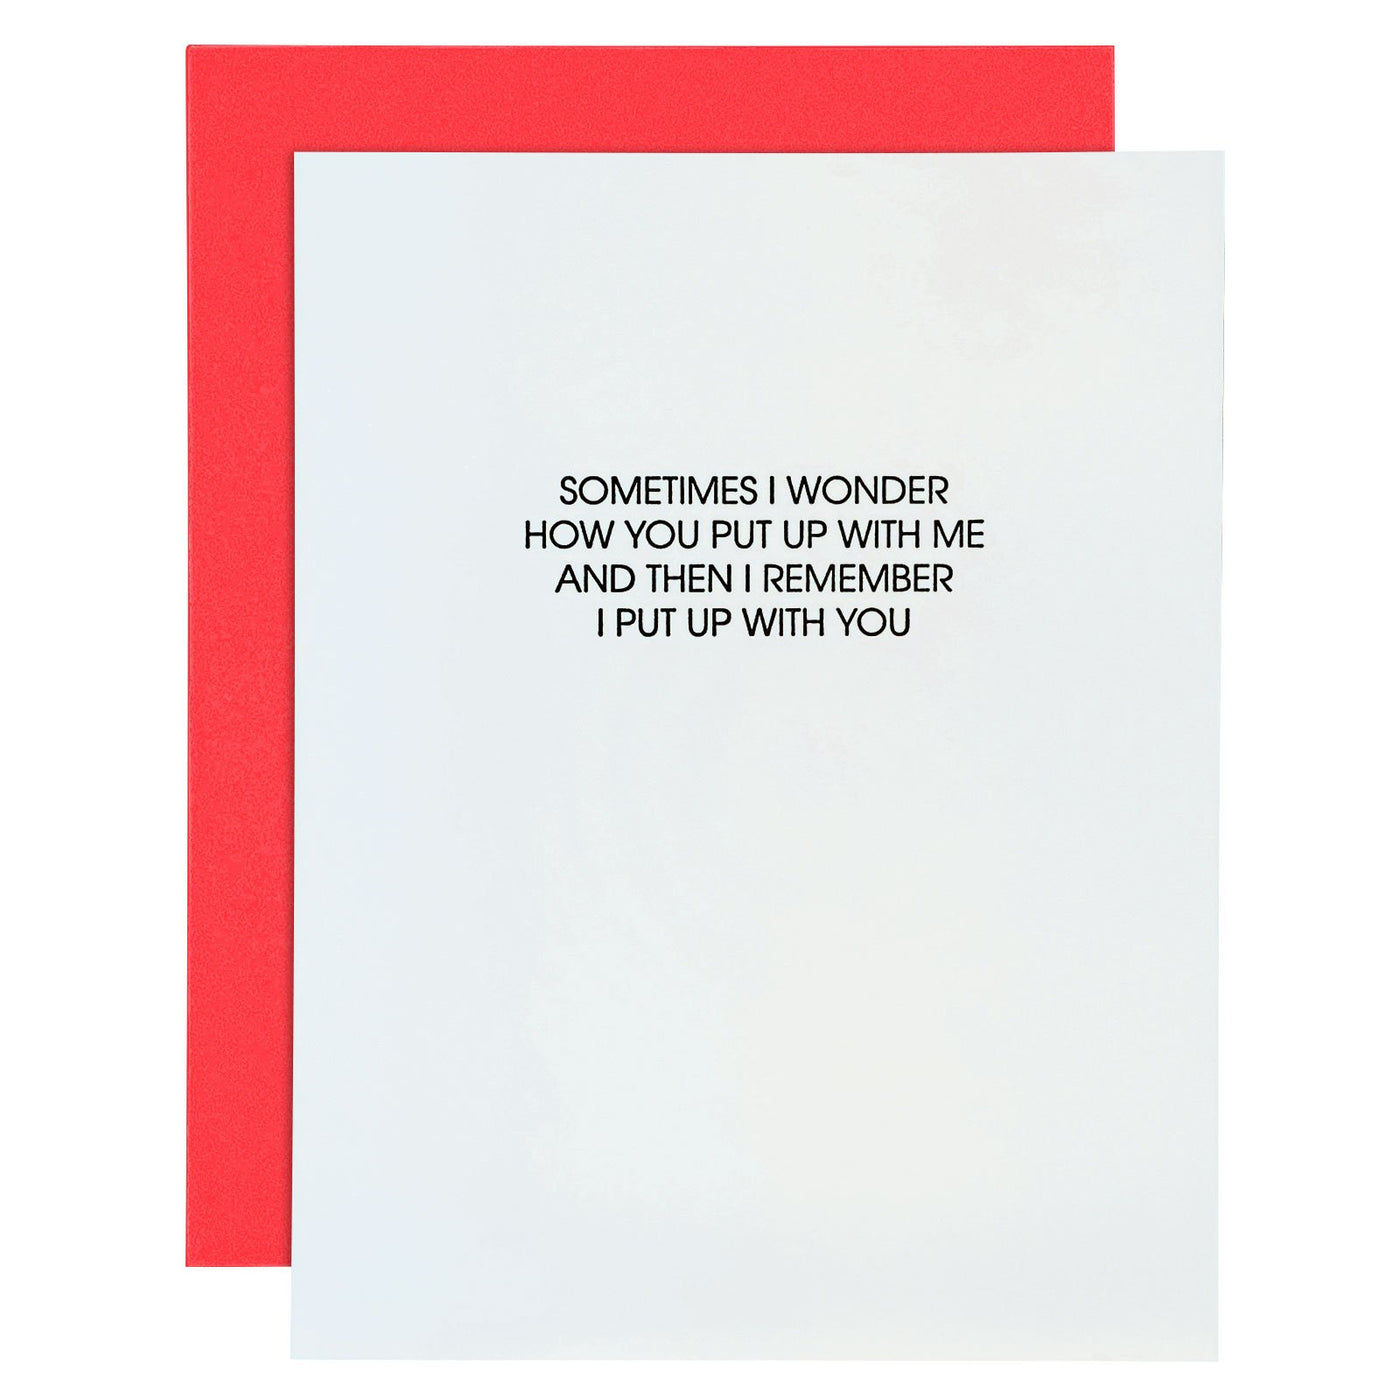 GREETING CARD "PUT UP WITH ME"